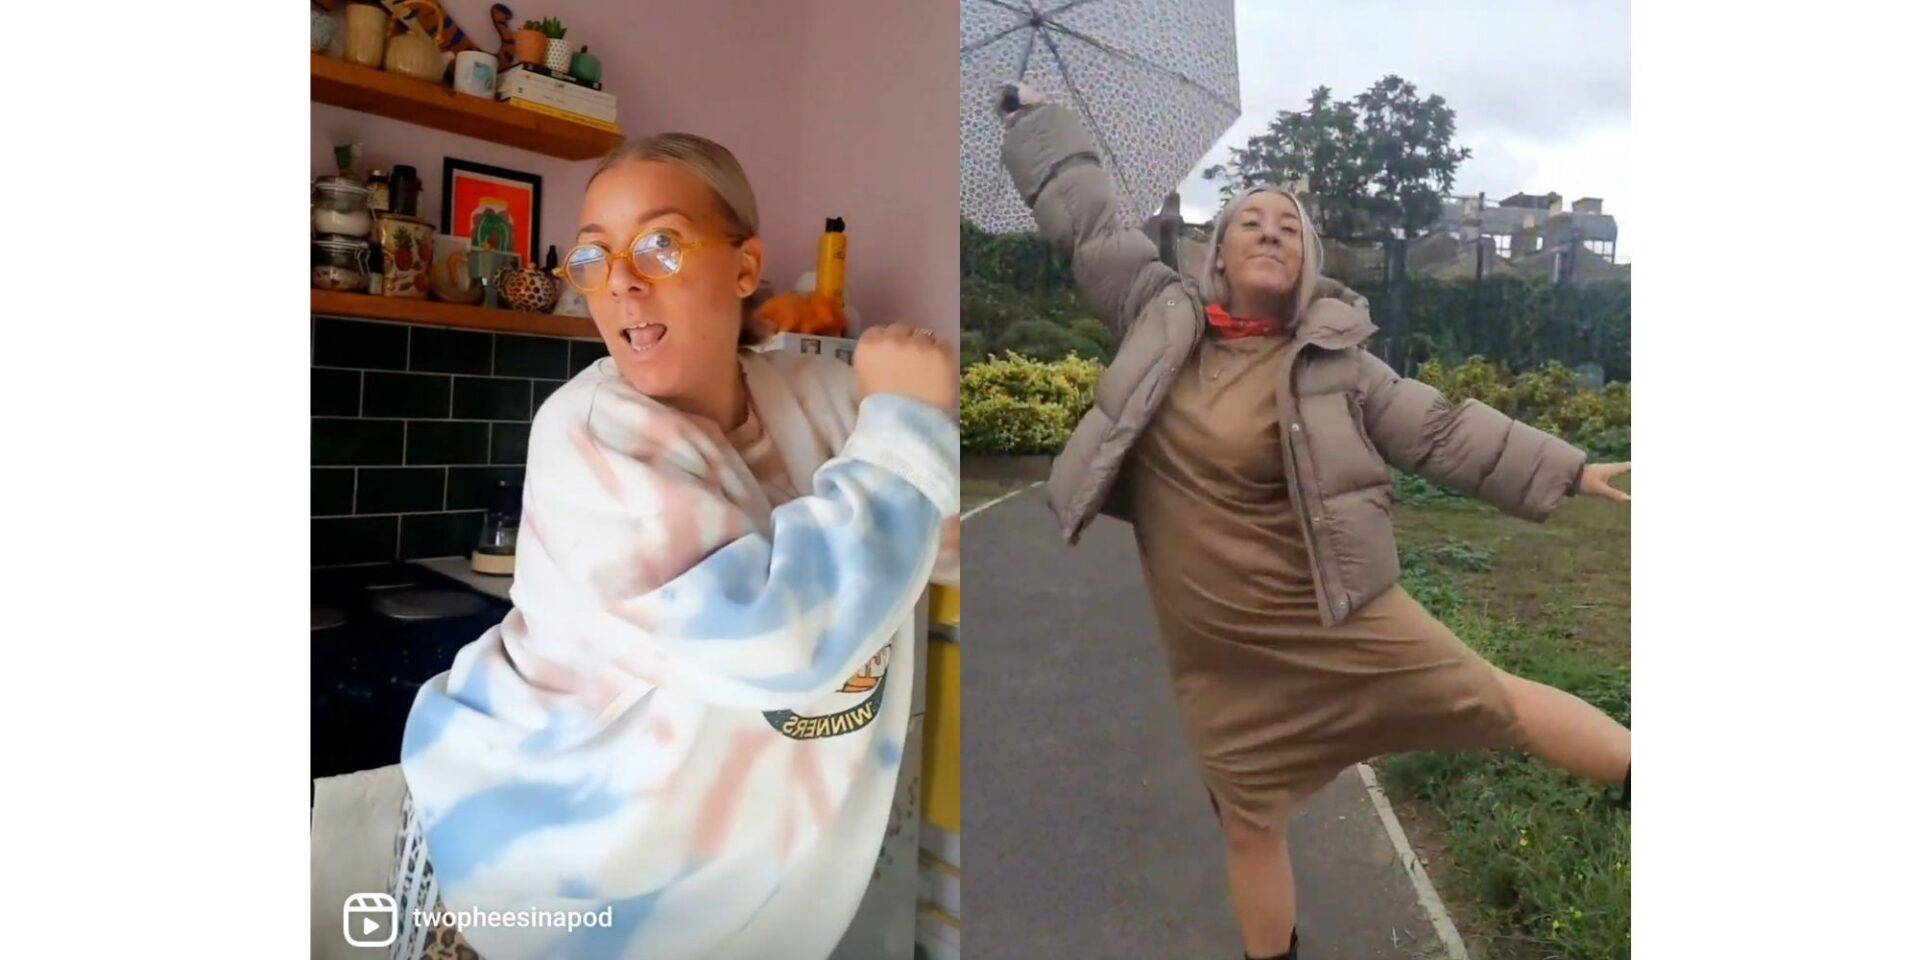 two photos side by side of the same woman dancing, one inside and one outside holding an umbrella